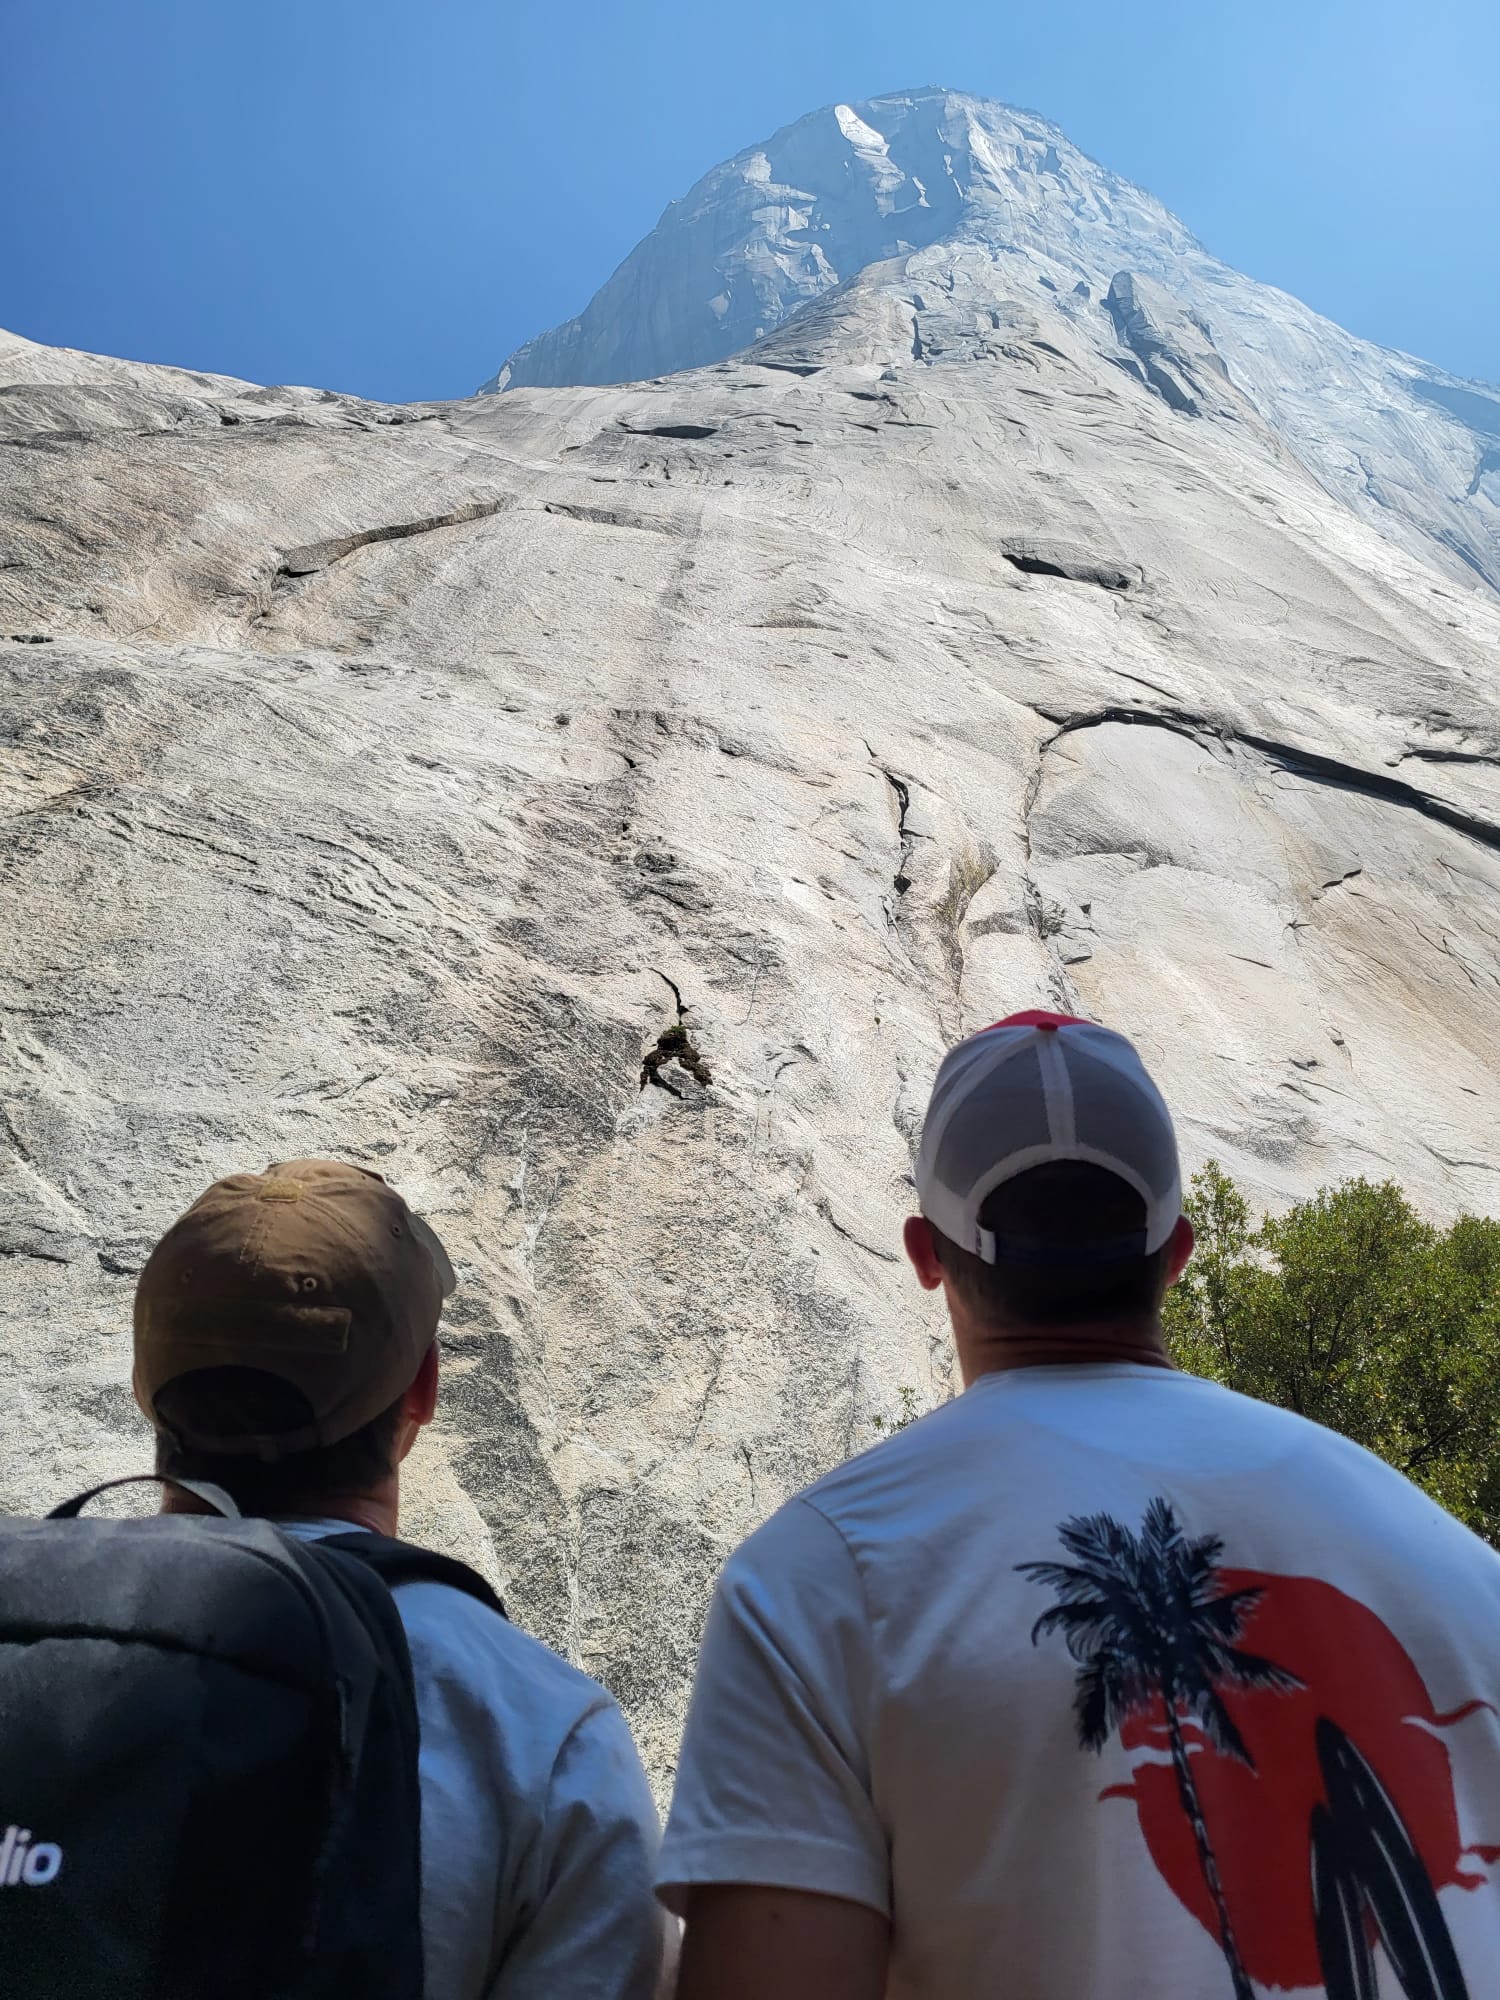 Two people looking up at the cliffs of Yosemite.